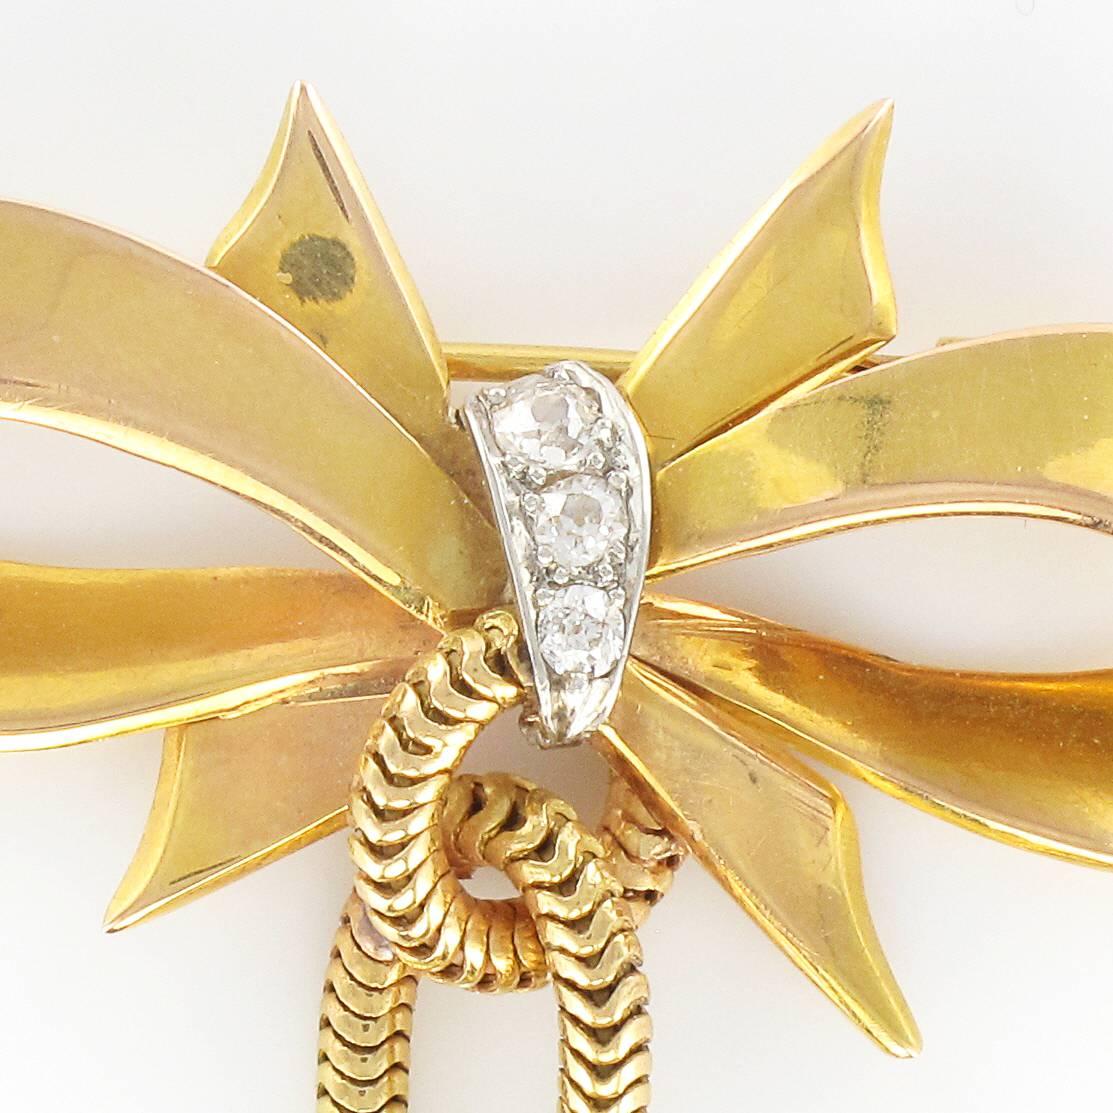 Brooch in 18 carat yellow gold.
This tank brooch in the form of a bow features a central strap set with diamonds. At its base a looped snake chain is finished at each end with a golden bead and cone. It has a pump clasp. 
Width at widest: 3.3 cm,